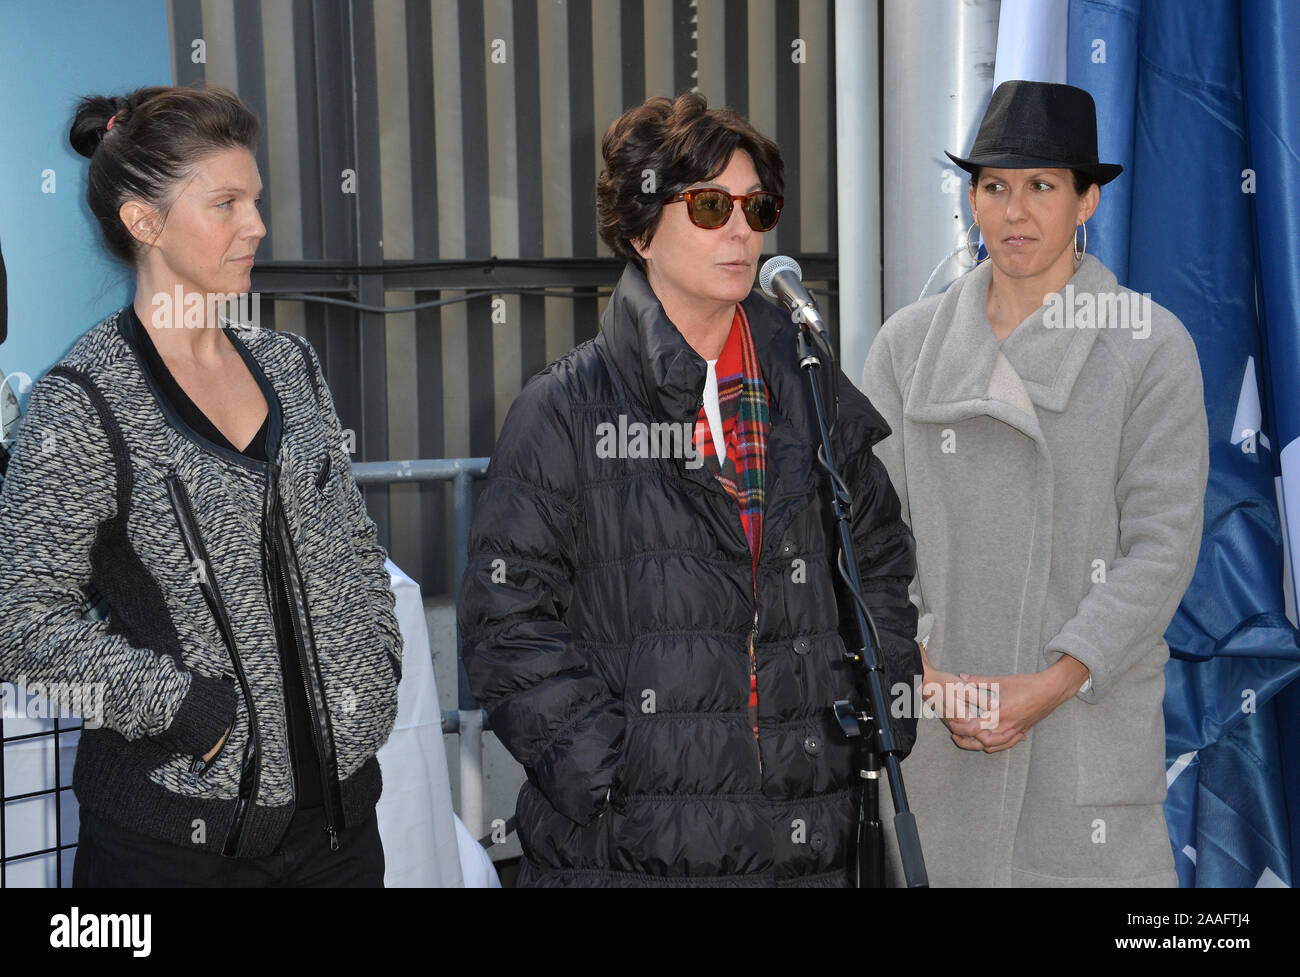 LOS ANGELES, CA. December 11, 2015: Tina Sinatra (centre), daughter of Frank Sinatra, & his granddaughters AJ Lambert (left) & Amanda Erlinger at the ceremony atop the Capitol Records Building in Hollywood to raise a 100th birthday flag in honor of singer Frank Sinatra who was born 100 years ago on 12th December.  © 2015 Paul Smith / Featureflash Stock Photo